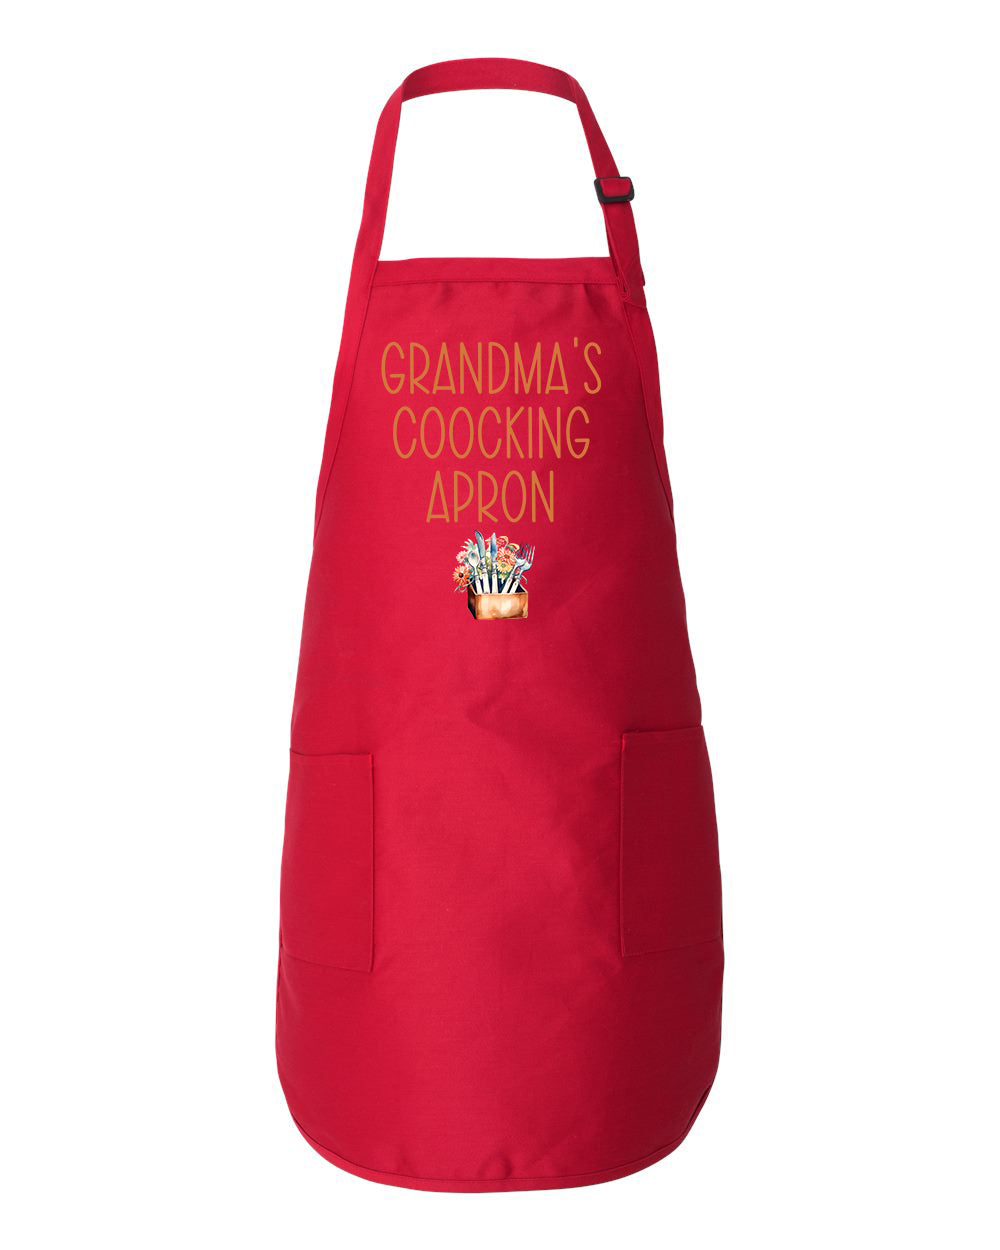 Grandma's Cooking Apron You Can Add Any text Instead of Grandma